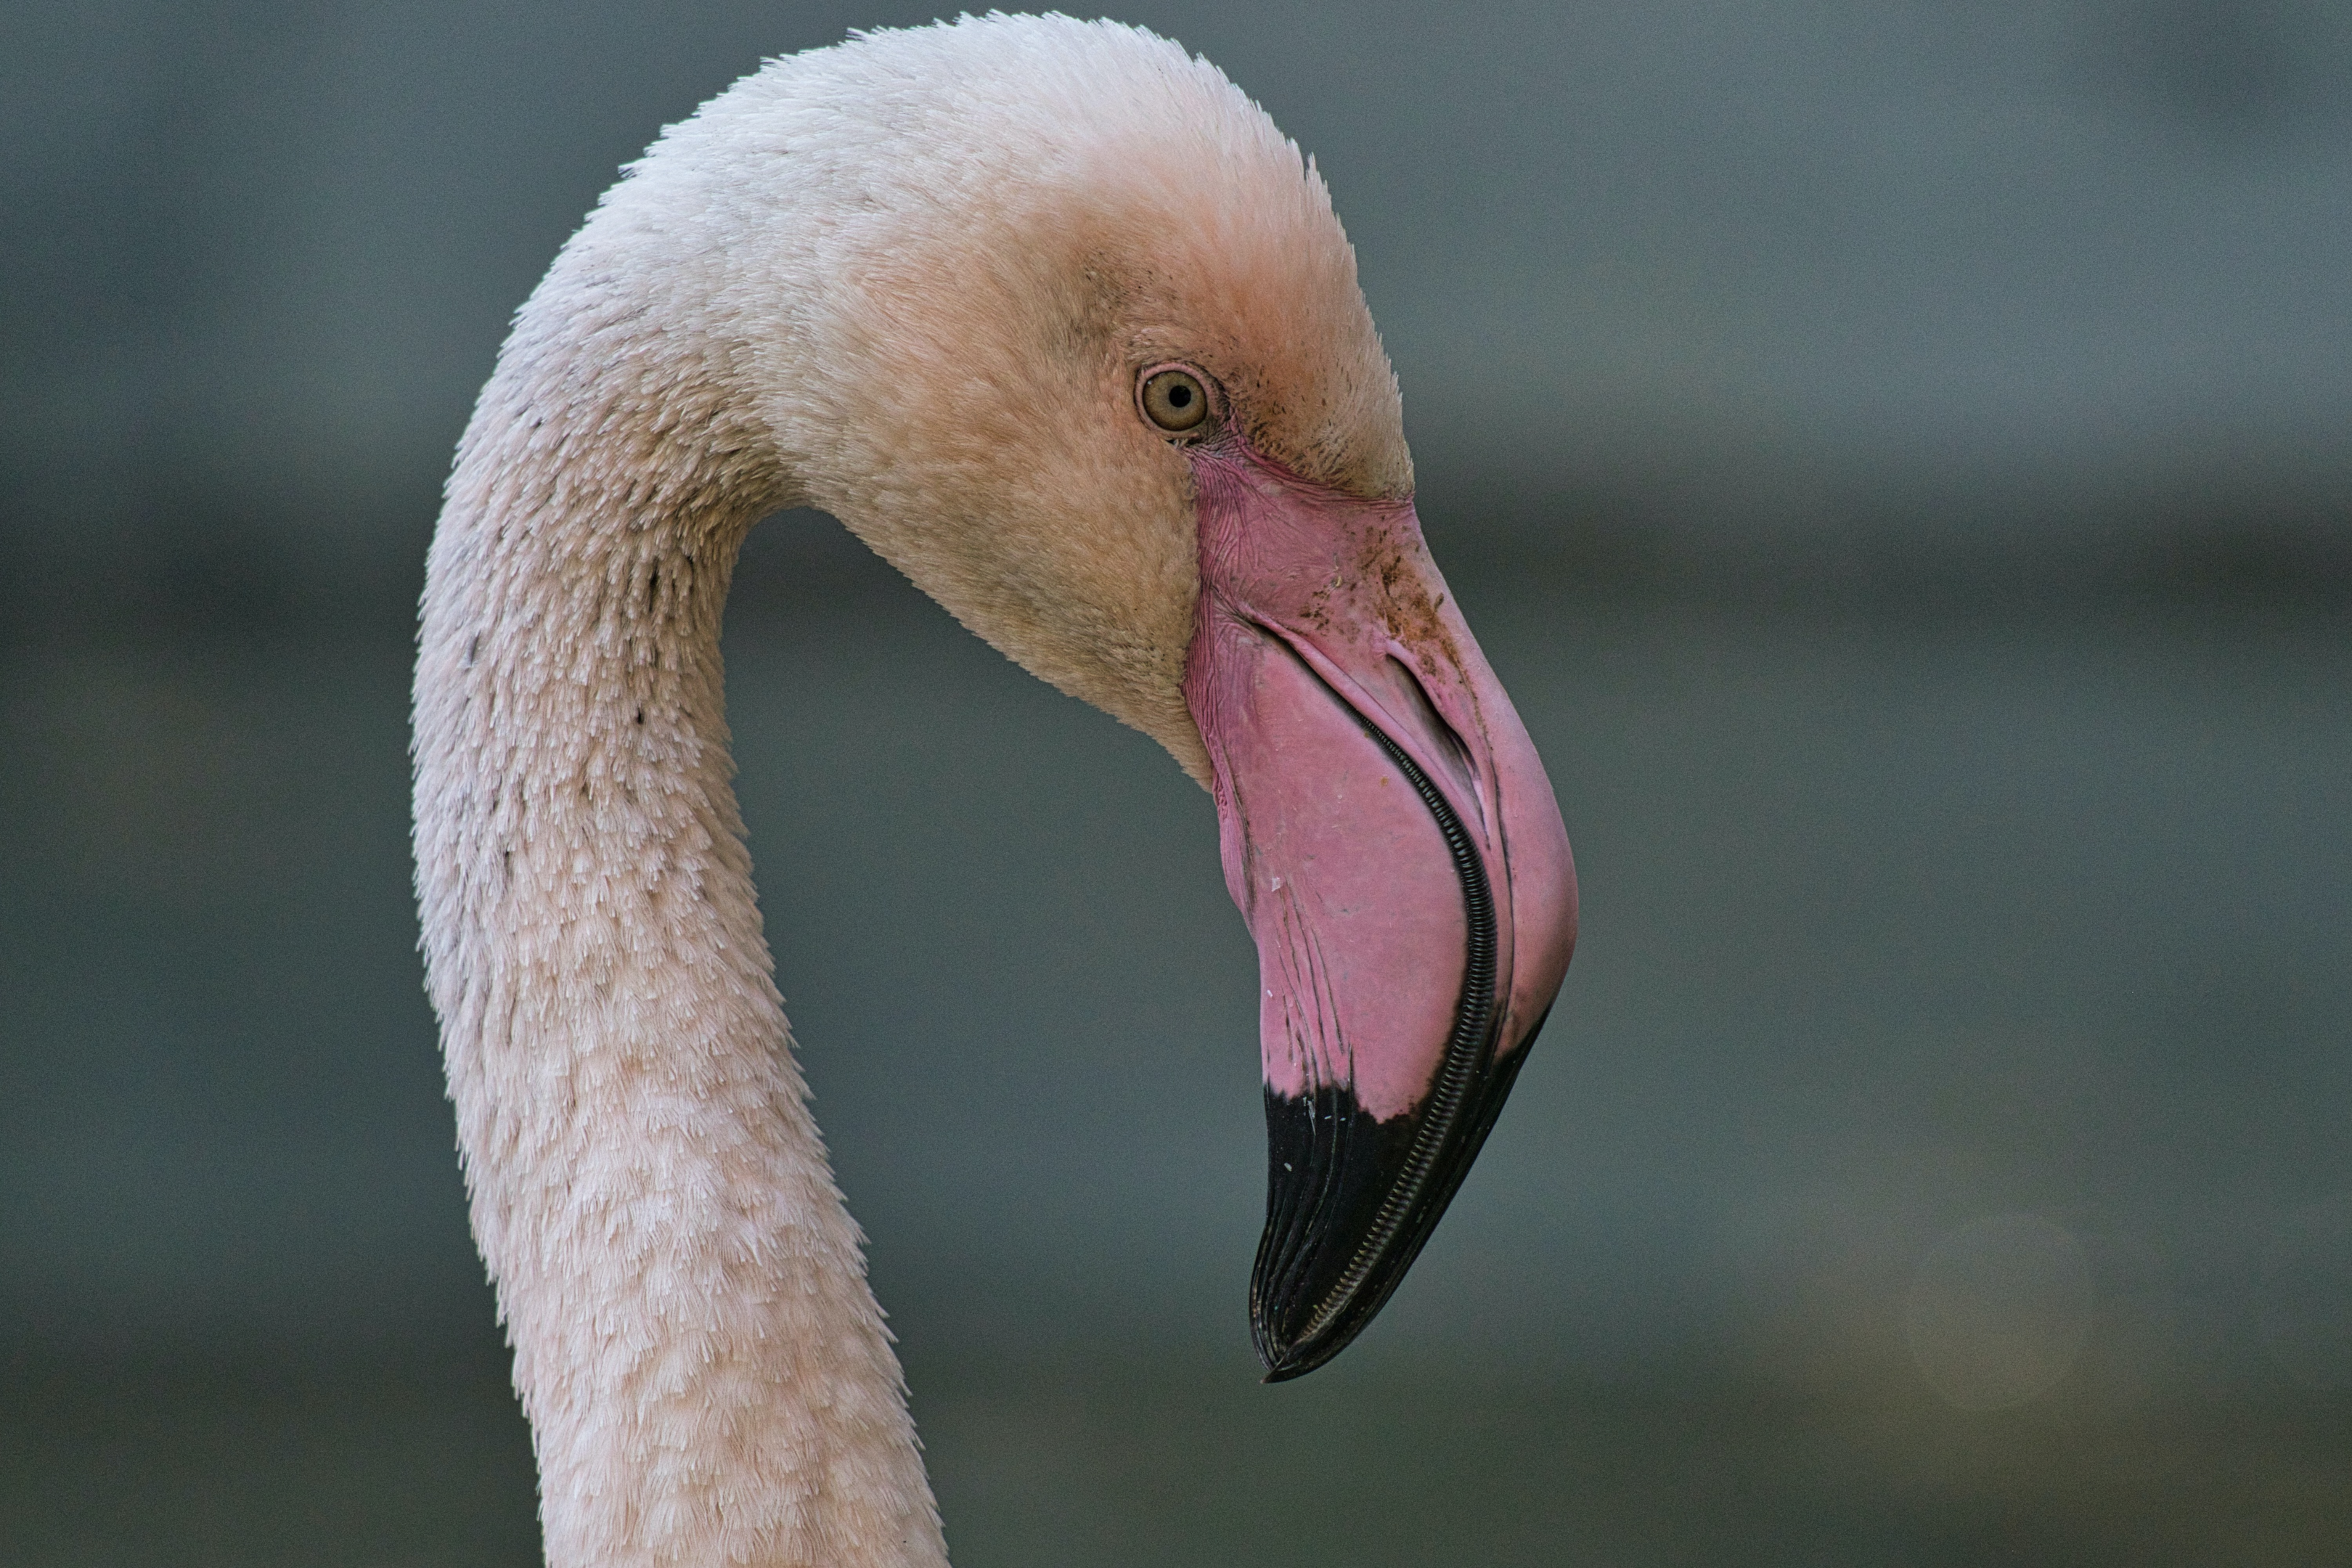 Flamingo at Los Angeles Zoo in Los Angeles. Photo by Michael Branch